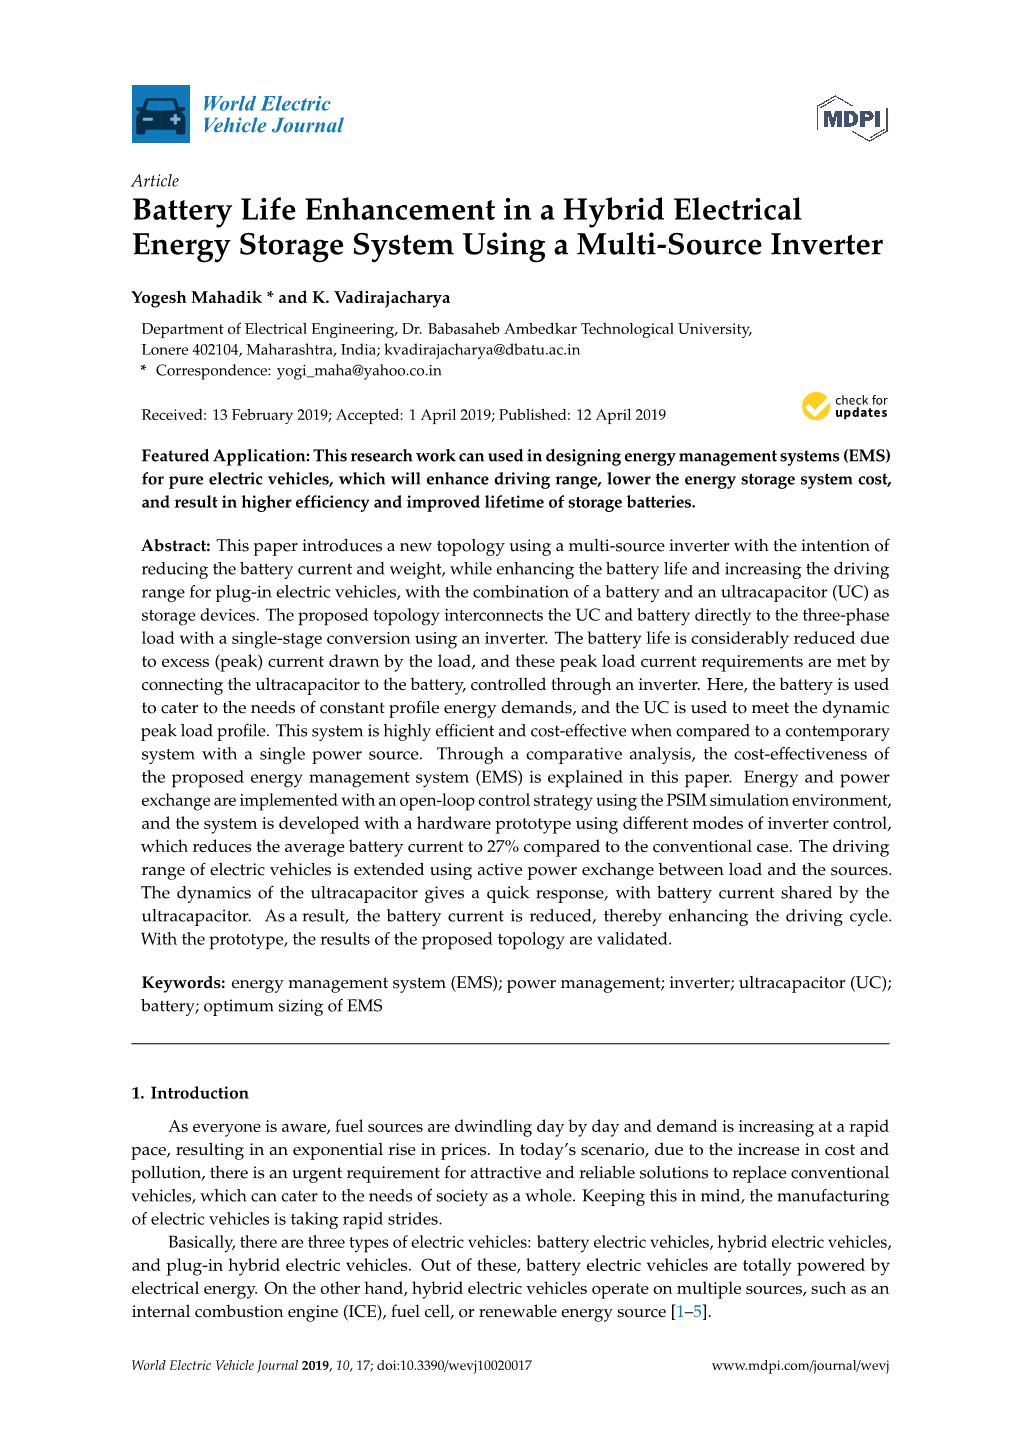 Battery Life Enhancement in a Hybrid Electrical Energy Storage System Using a Multi-Source Inverter